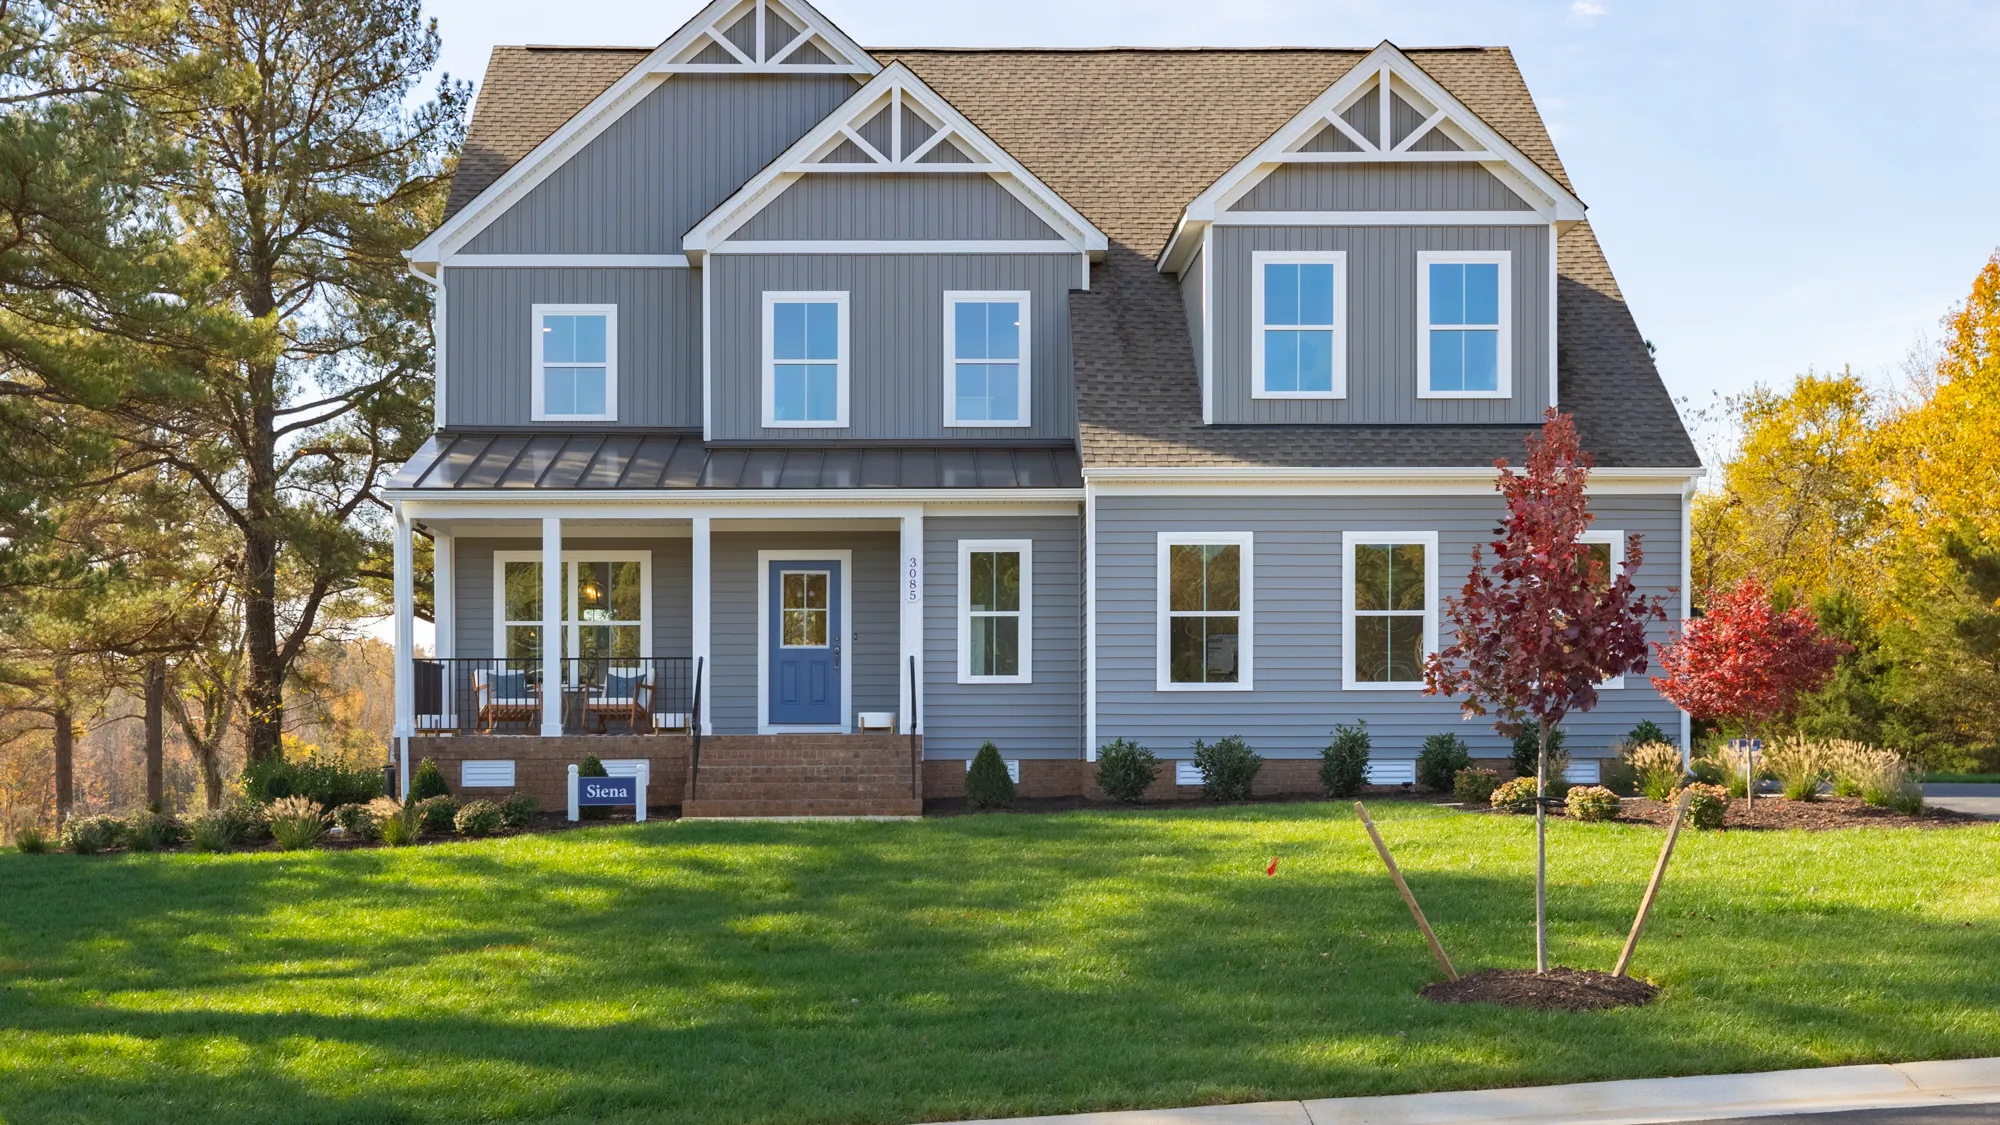 exterior of a new home in reed marsh community located in goochland, reed marsh